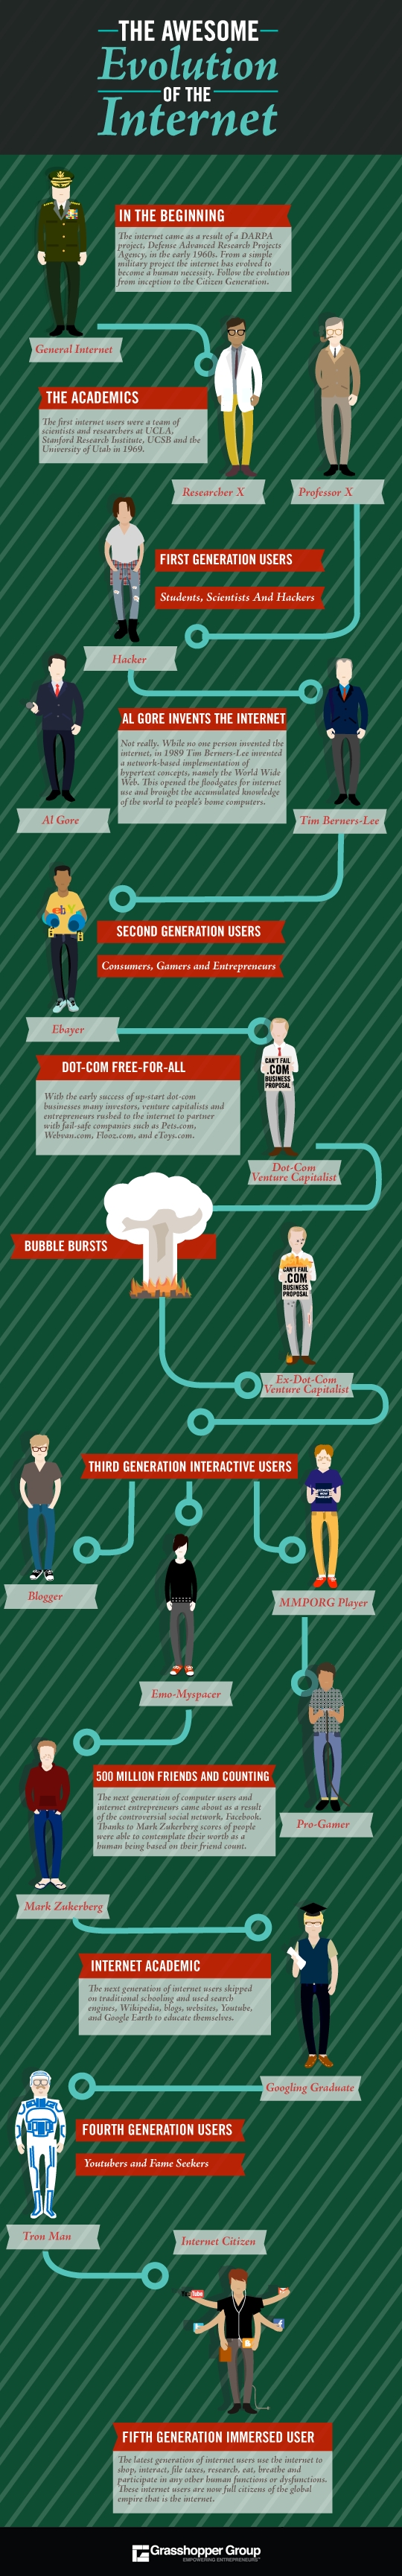 The Awesome Evolution of the Internet Infographic